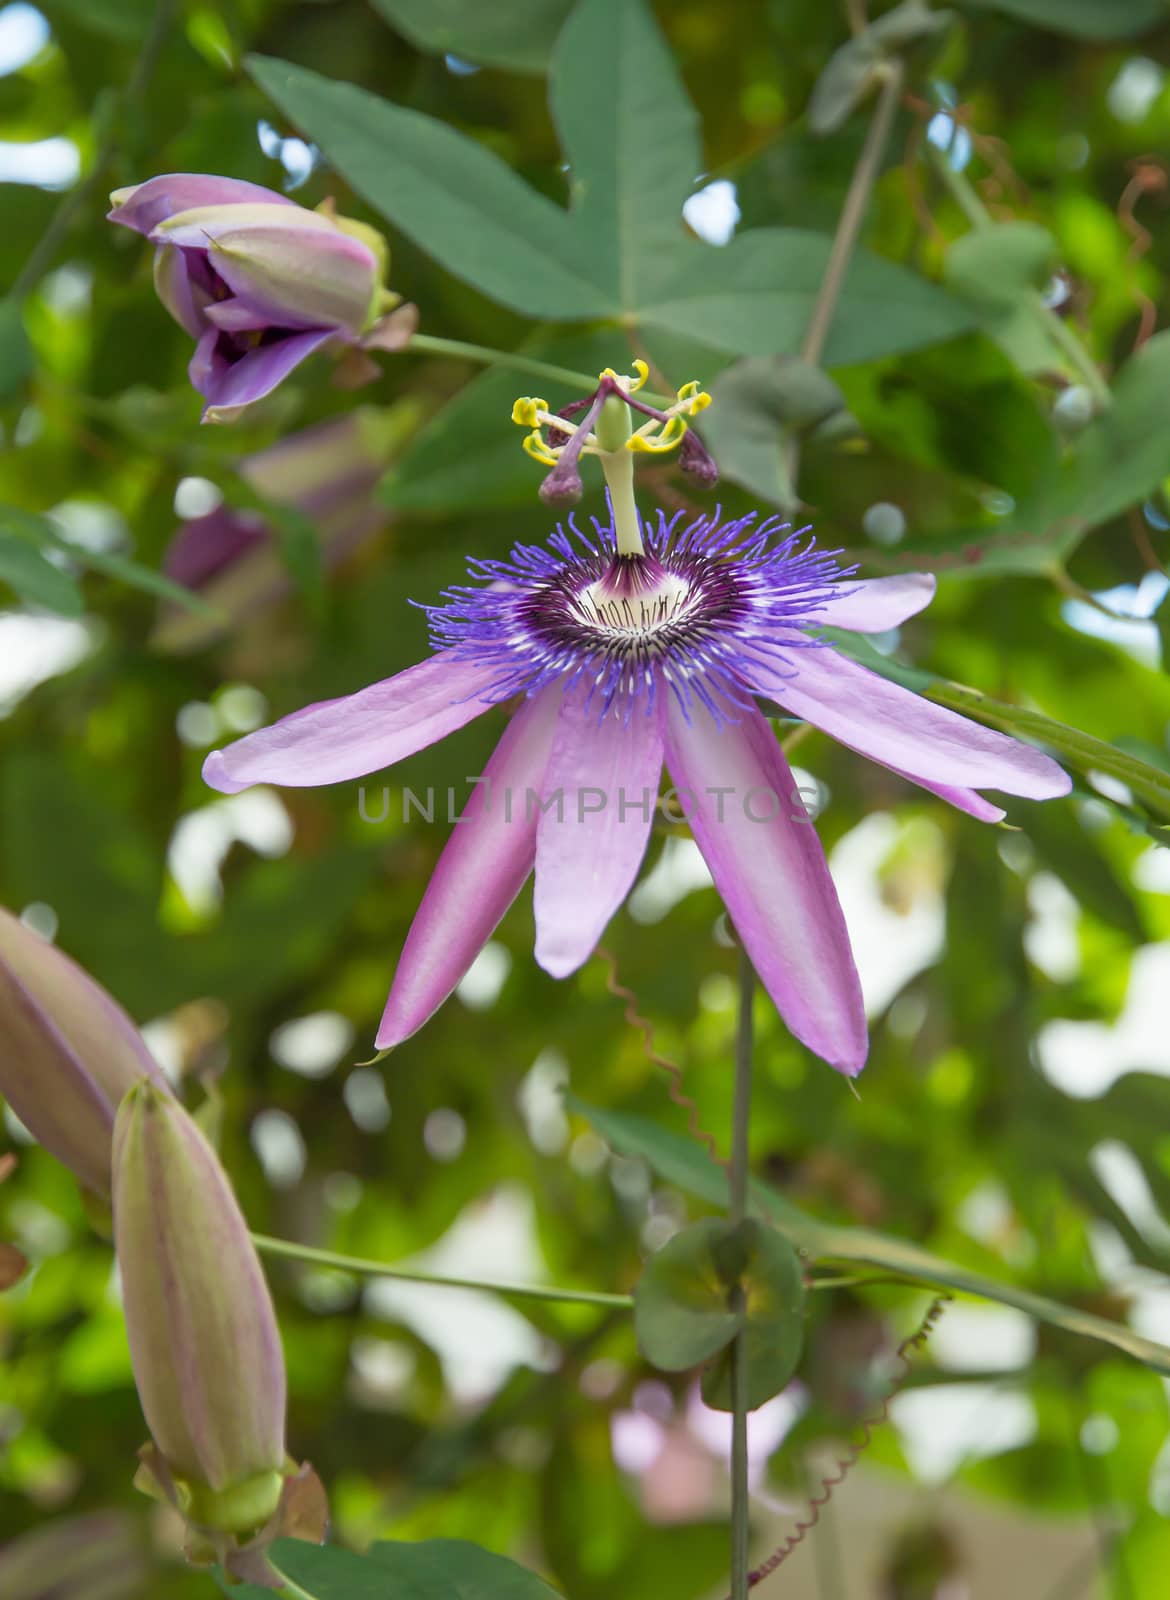 Passion flower Passiflora in foliage with buds.